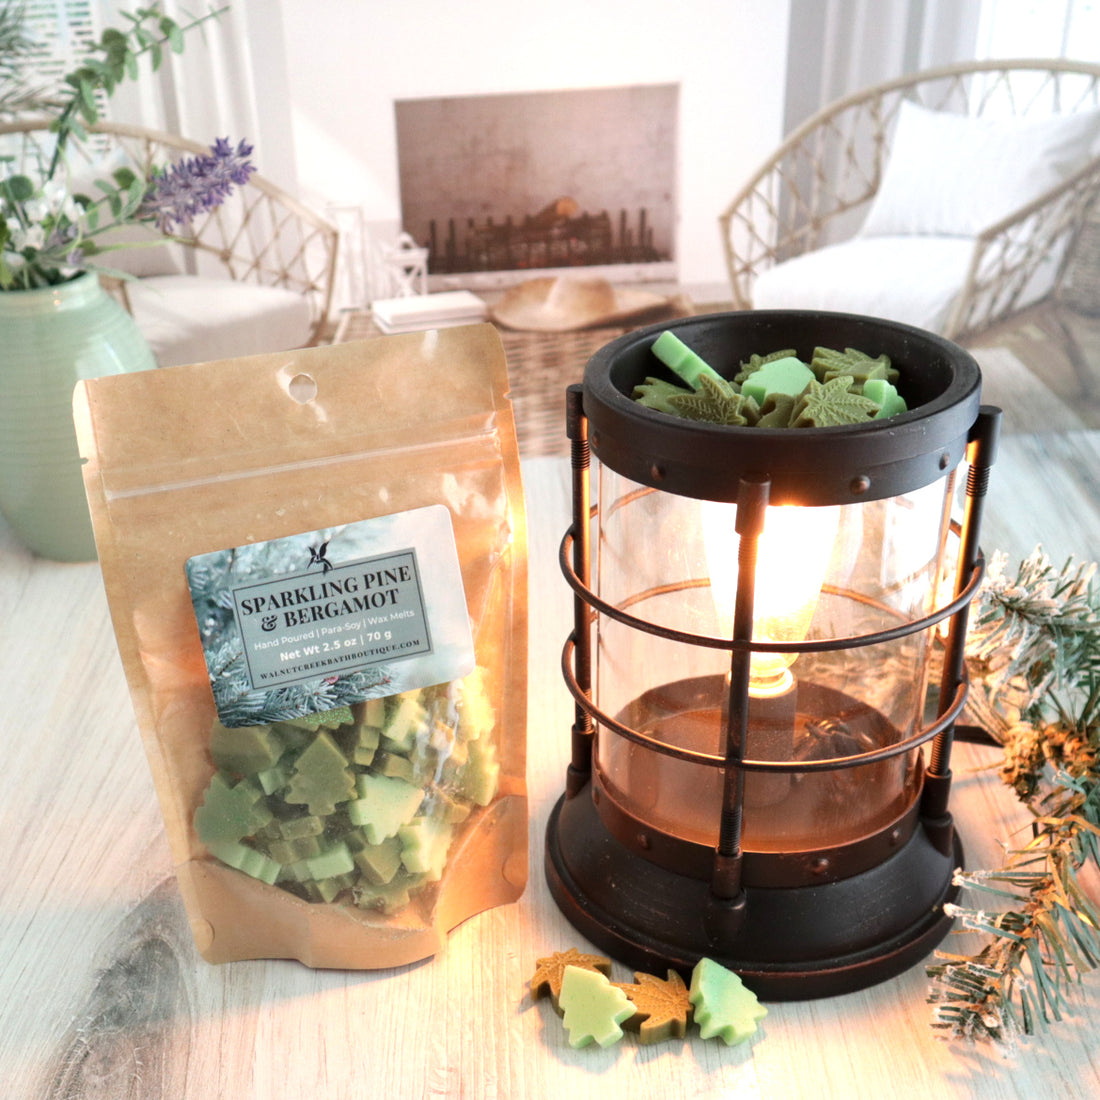 a bag of sparkling pine and bergamot wax melts are standing next to a lit wax melt burner. this has some of the light and dark green wax pieces piled in it. there are also some pieces in a pile in front of the burner. the pieces are in the shape of trees and leaves, some light and some dark green in color. there is a sprig of frosted pine branch to the right of the burner. this is all sitting on a washed out wooden base with a couple of chairs in the background next to a fireplace